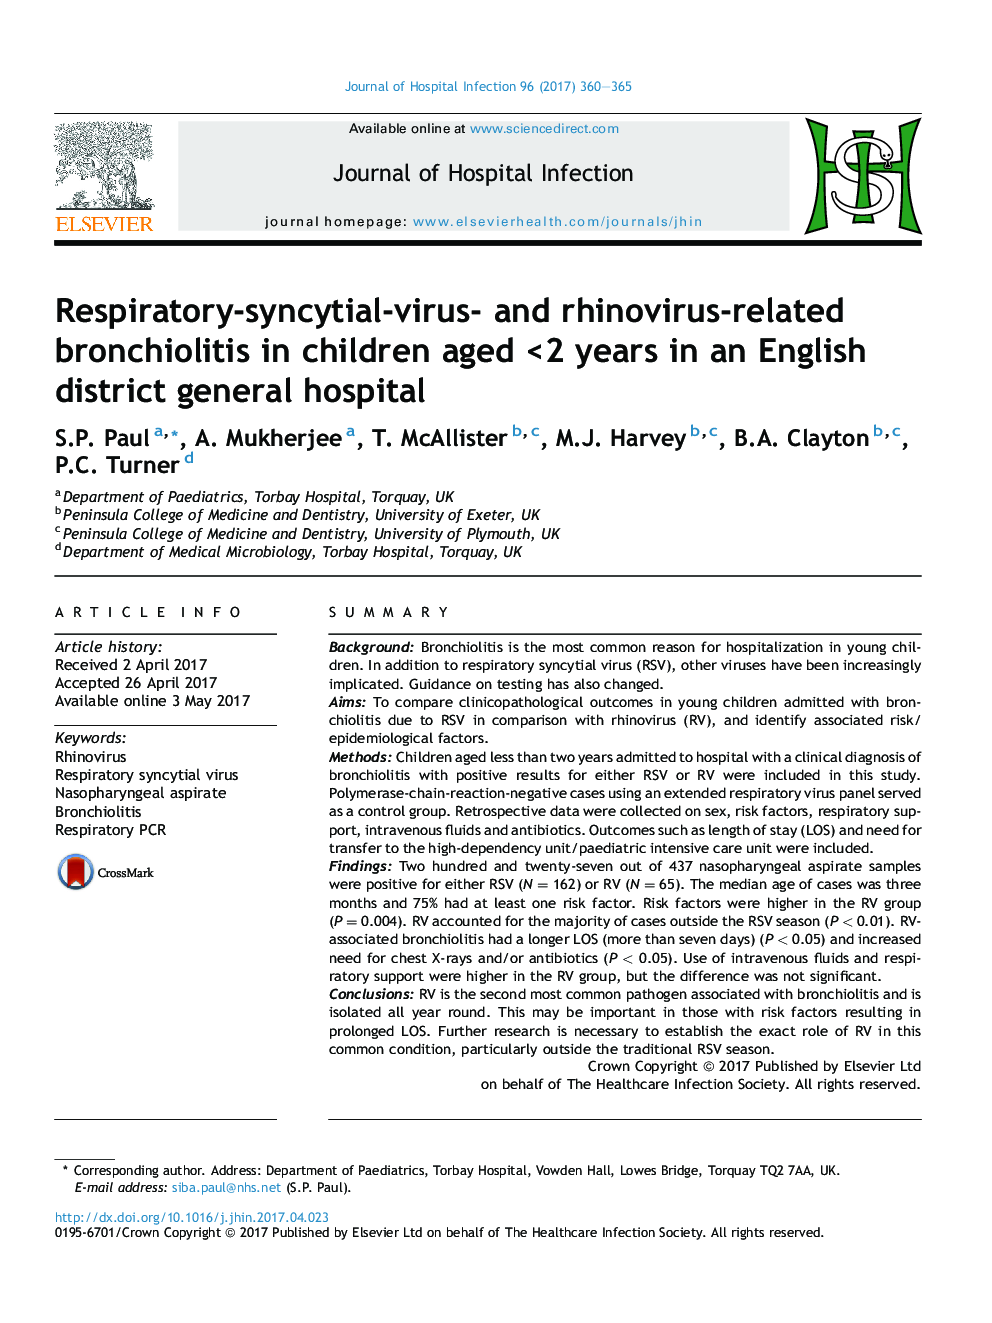 Respiratory-syncytial-virus- and rhinovirus-related bronchiolitis in children aged <2 years in an English district general hospital